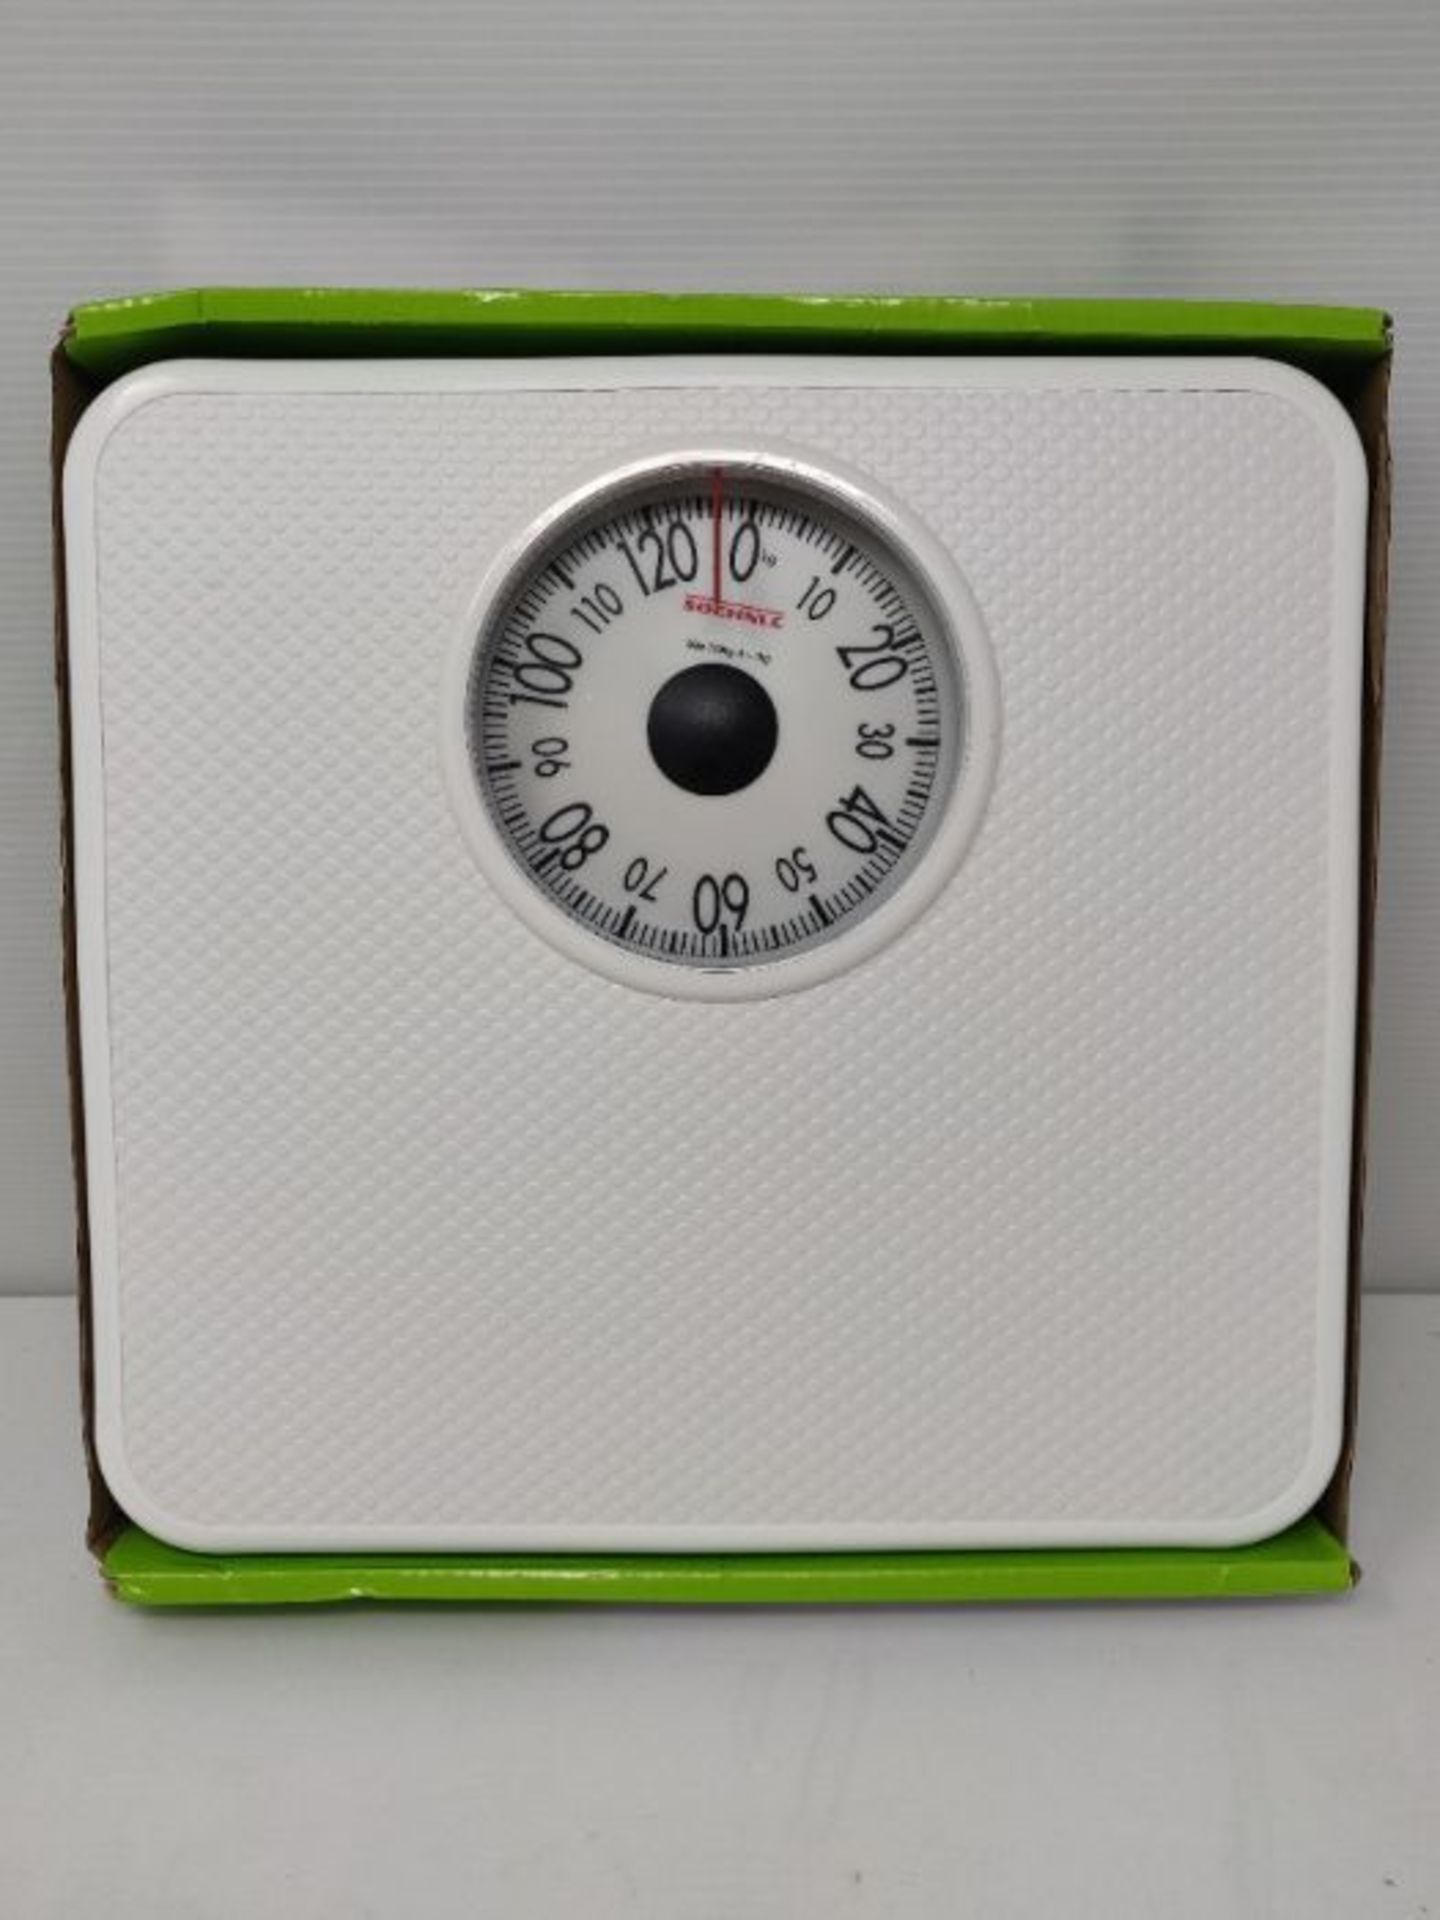 Soehnle Tempo 61098 Analogue Personal Scales White - Image 2 of 2